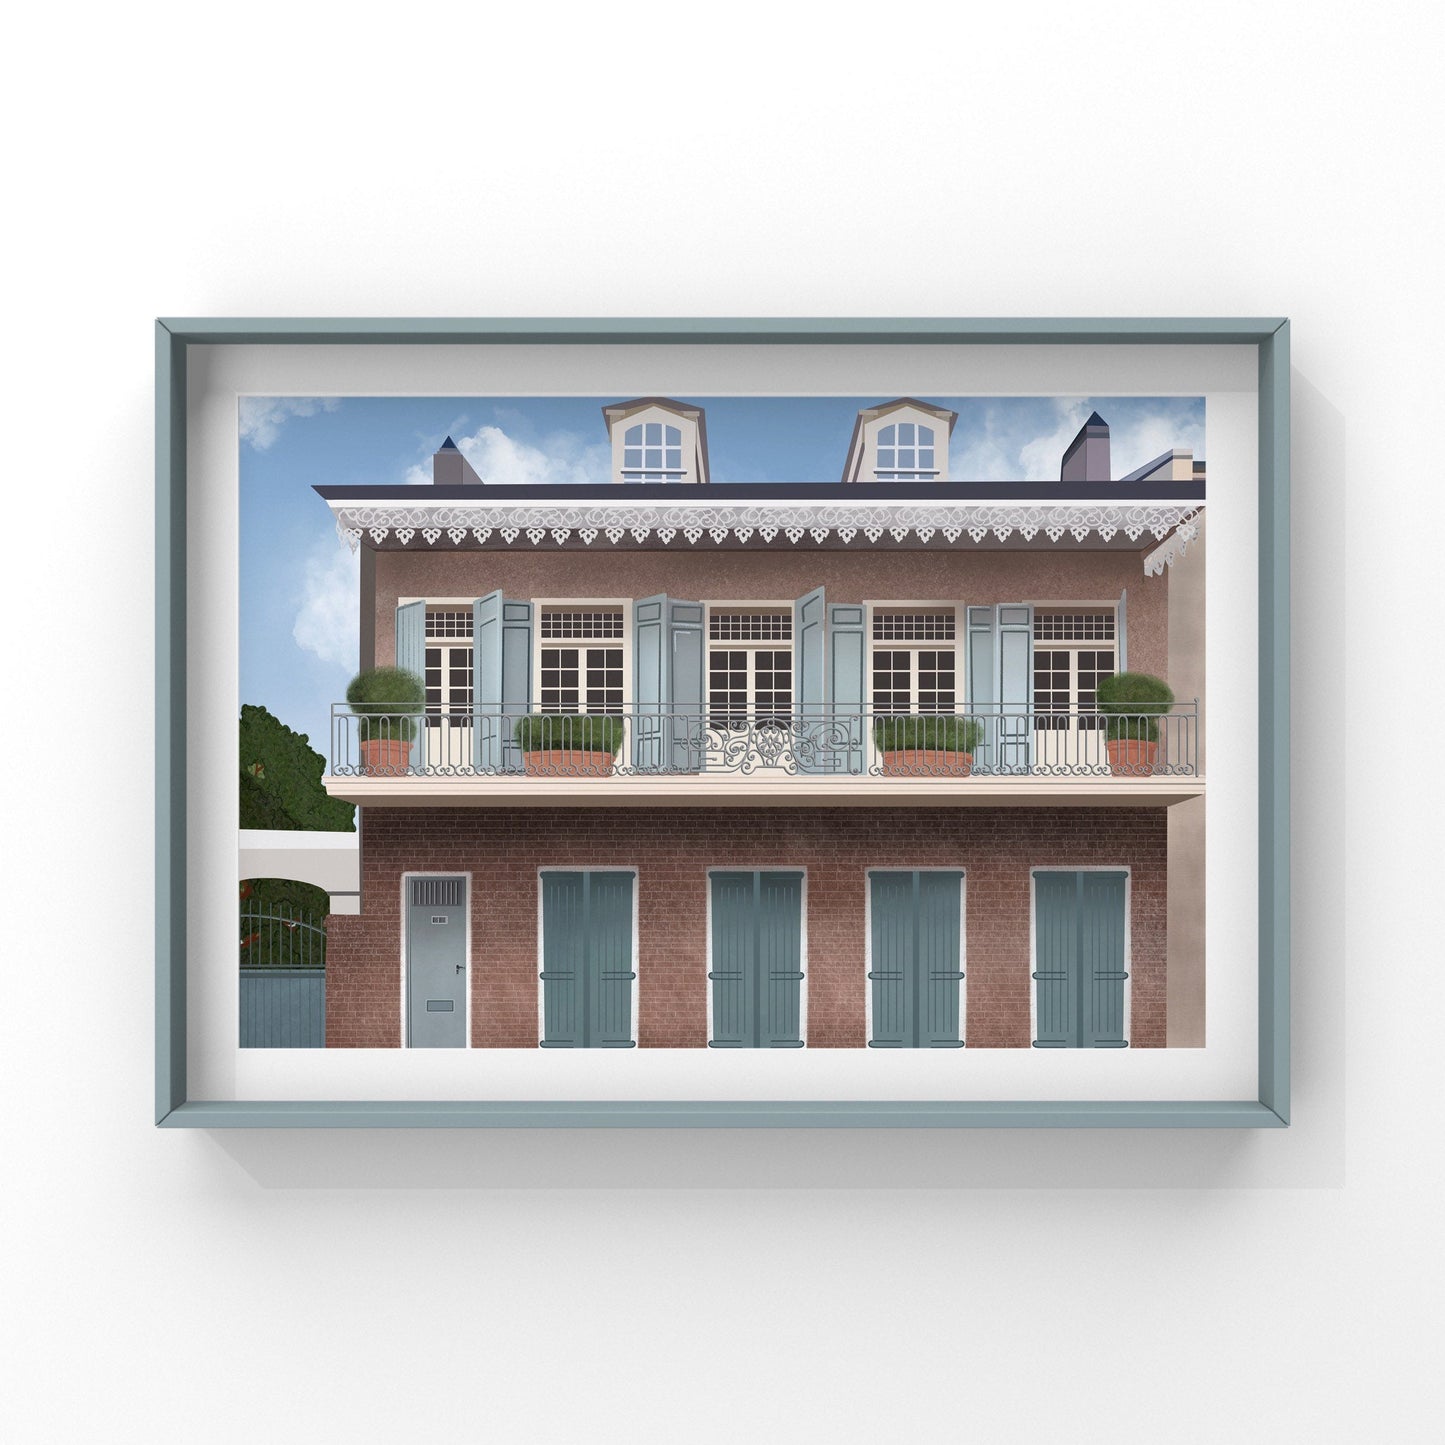 NOLA wall art featuring a beautiful house in New Orleans. If you've been to New Orleans, you know that it's impossible NOT to fall in love with this magical place, the architecture, the art, and the soul of the city.  I think this New Orleans art print captures just a moment of the beauty that New Orleans has to offer, and if you're also a resident or a lover of NOLA, Louisiana, I hope it brings back all the nostalgia for you. 